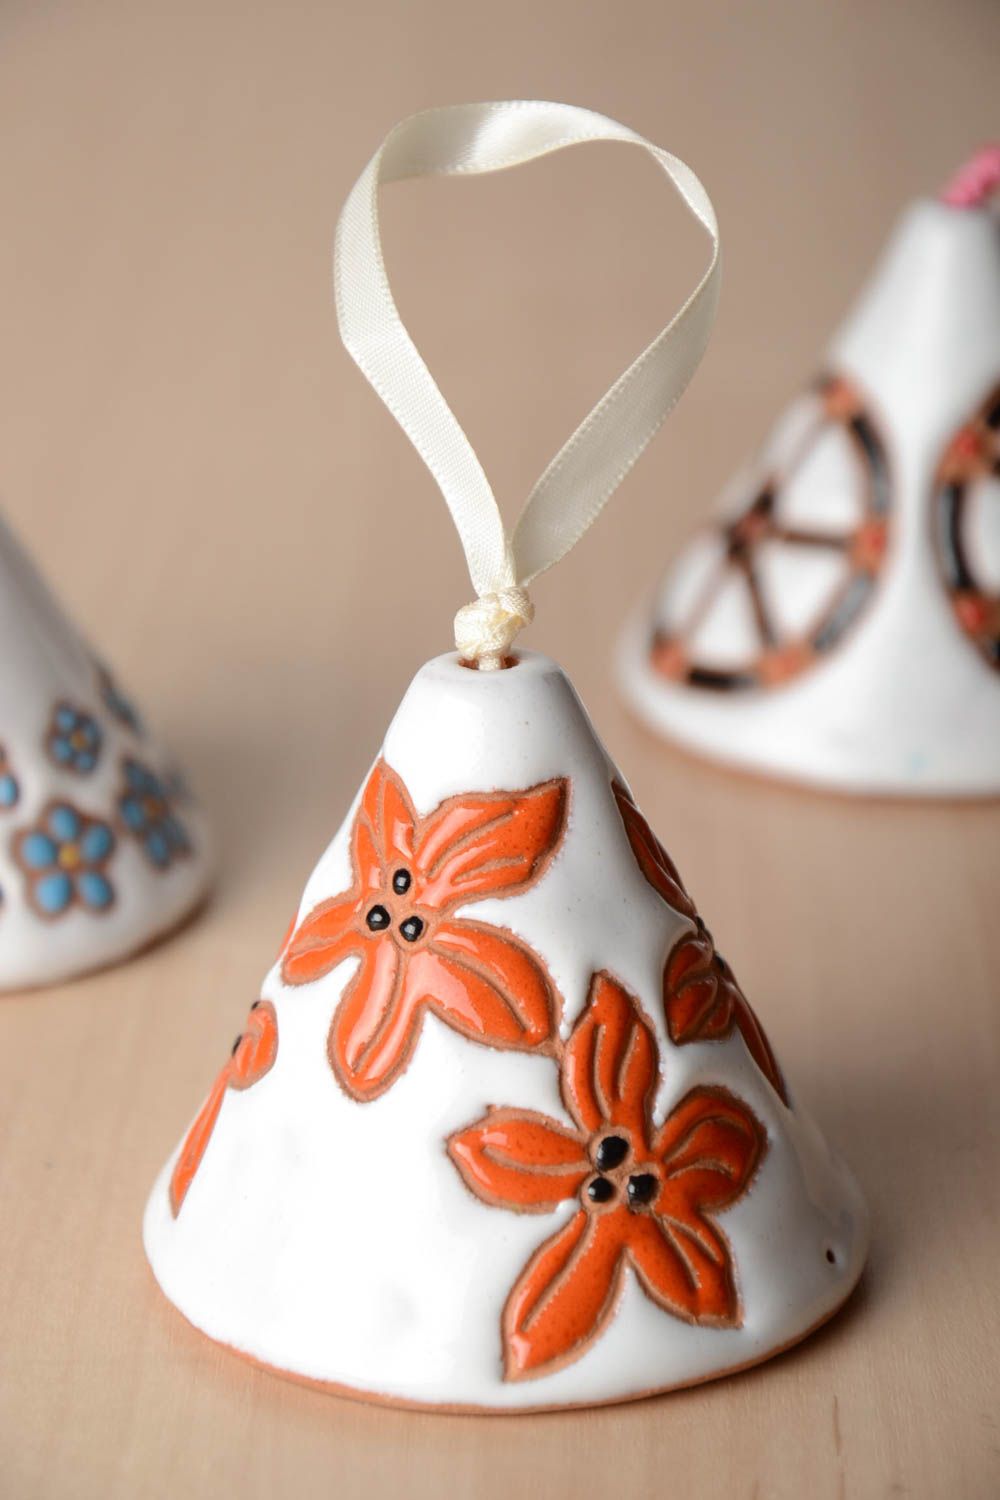 Handmade small ceramic white and orange decorative hanging bell with flowers photo 1